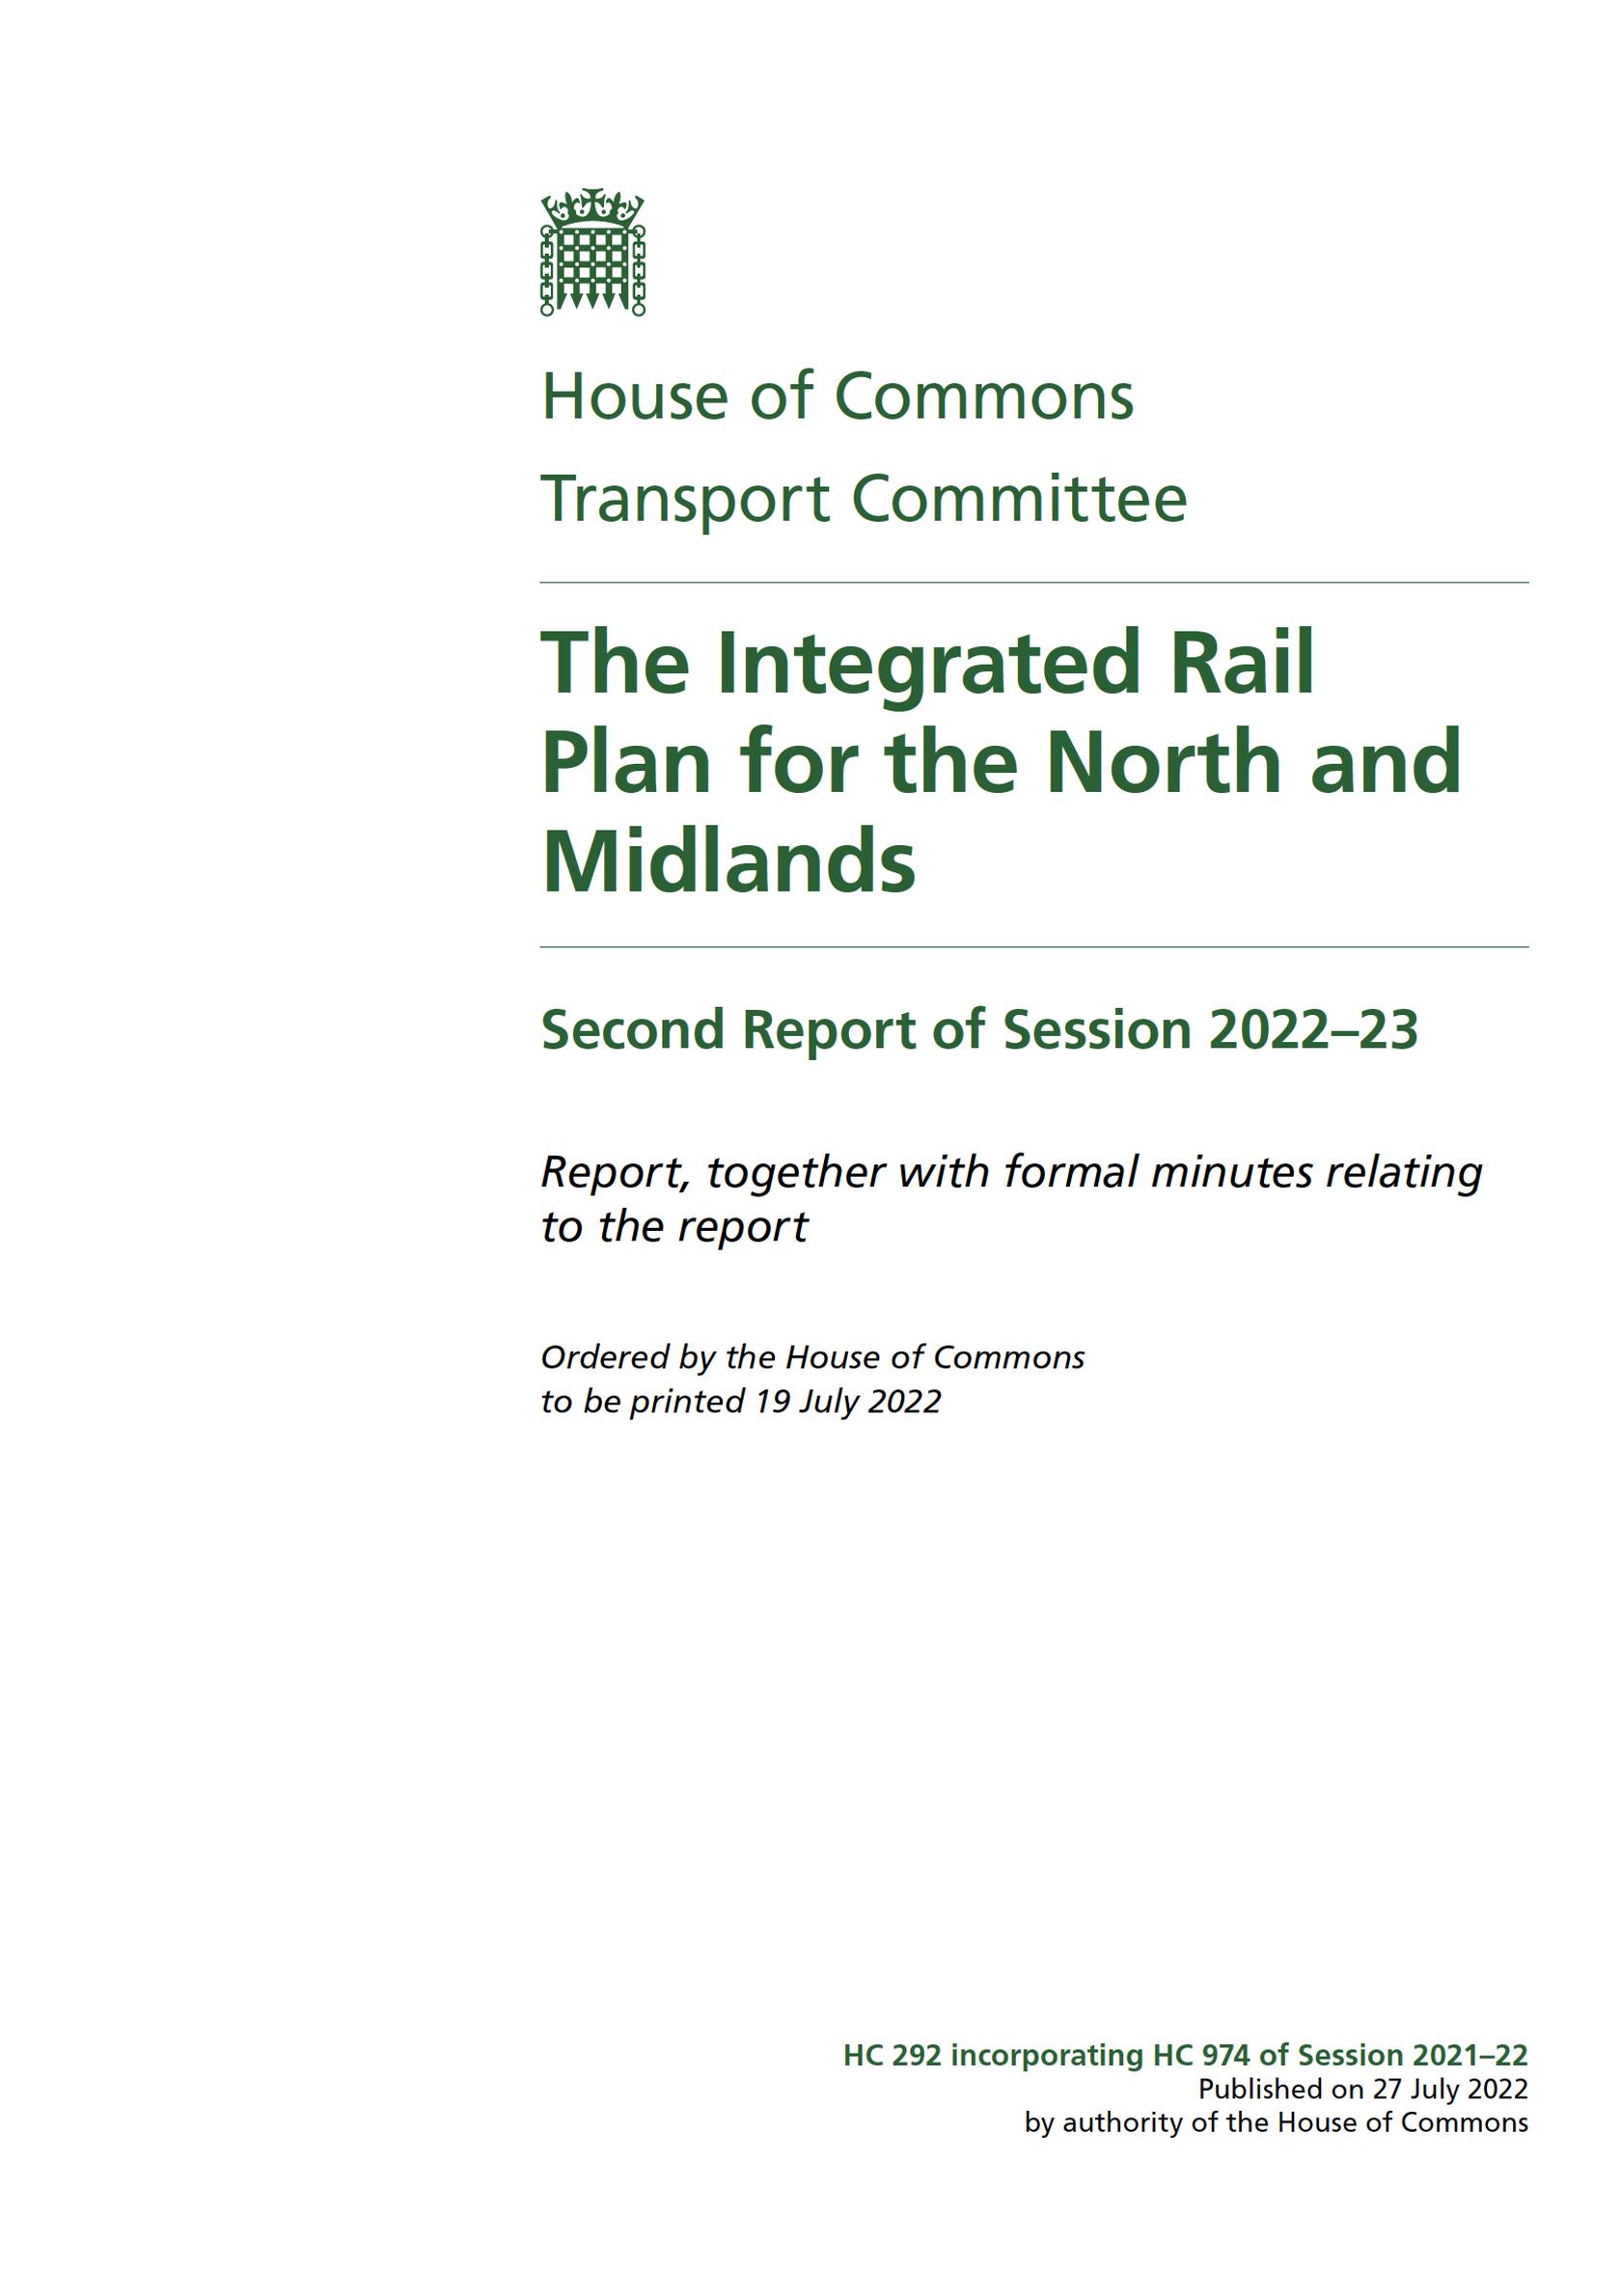 The Integrated Rail Plan for the North and Midlands